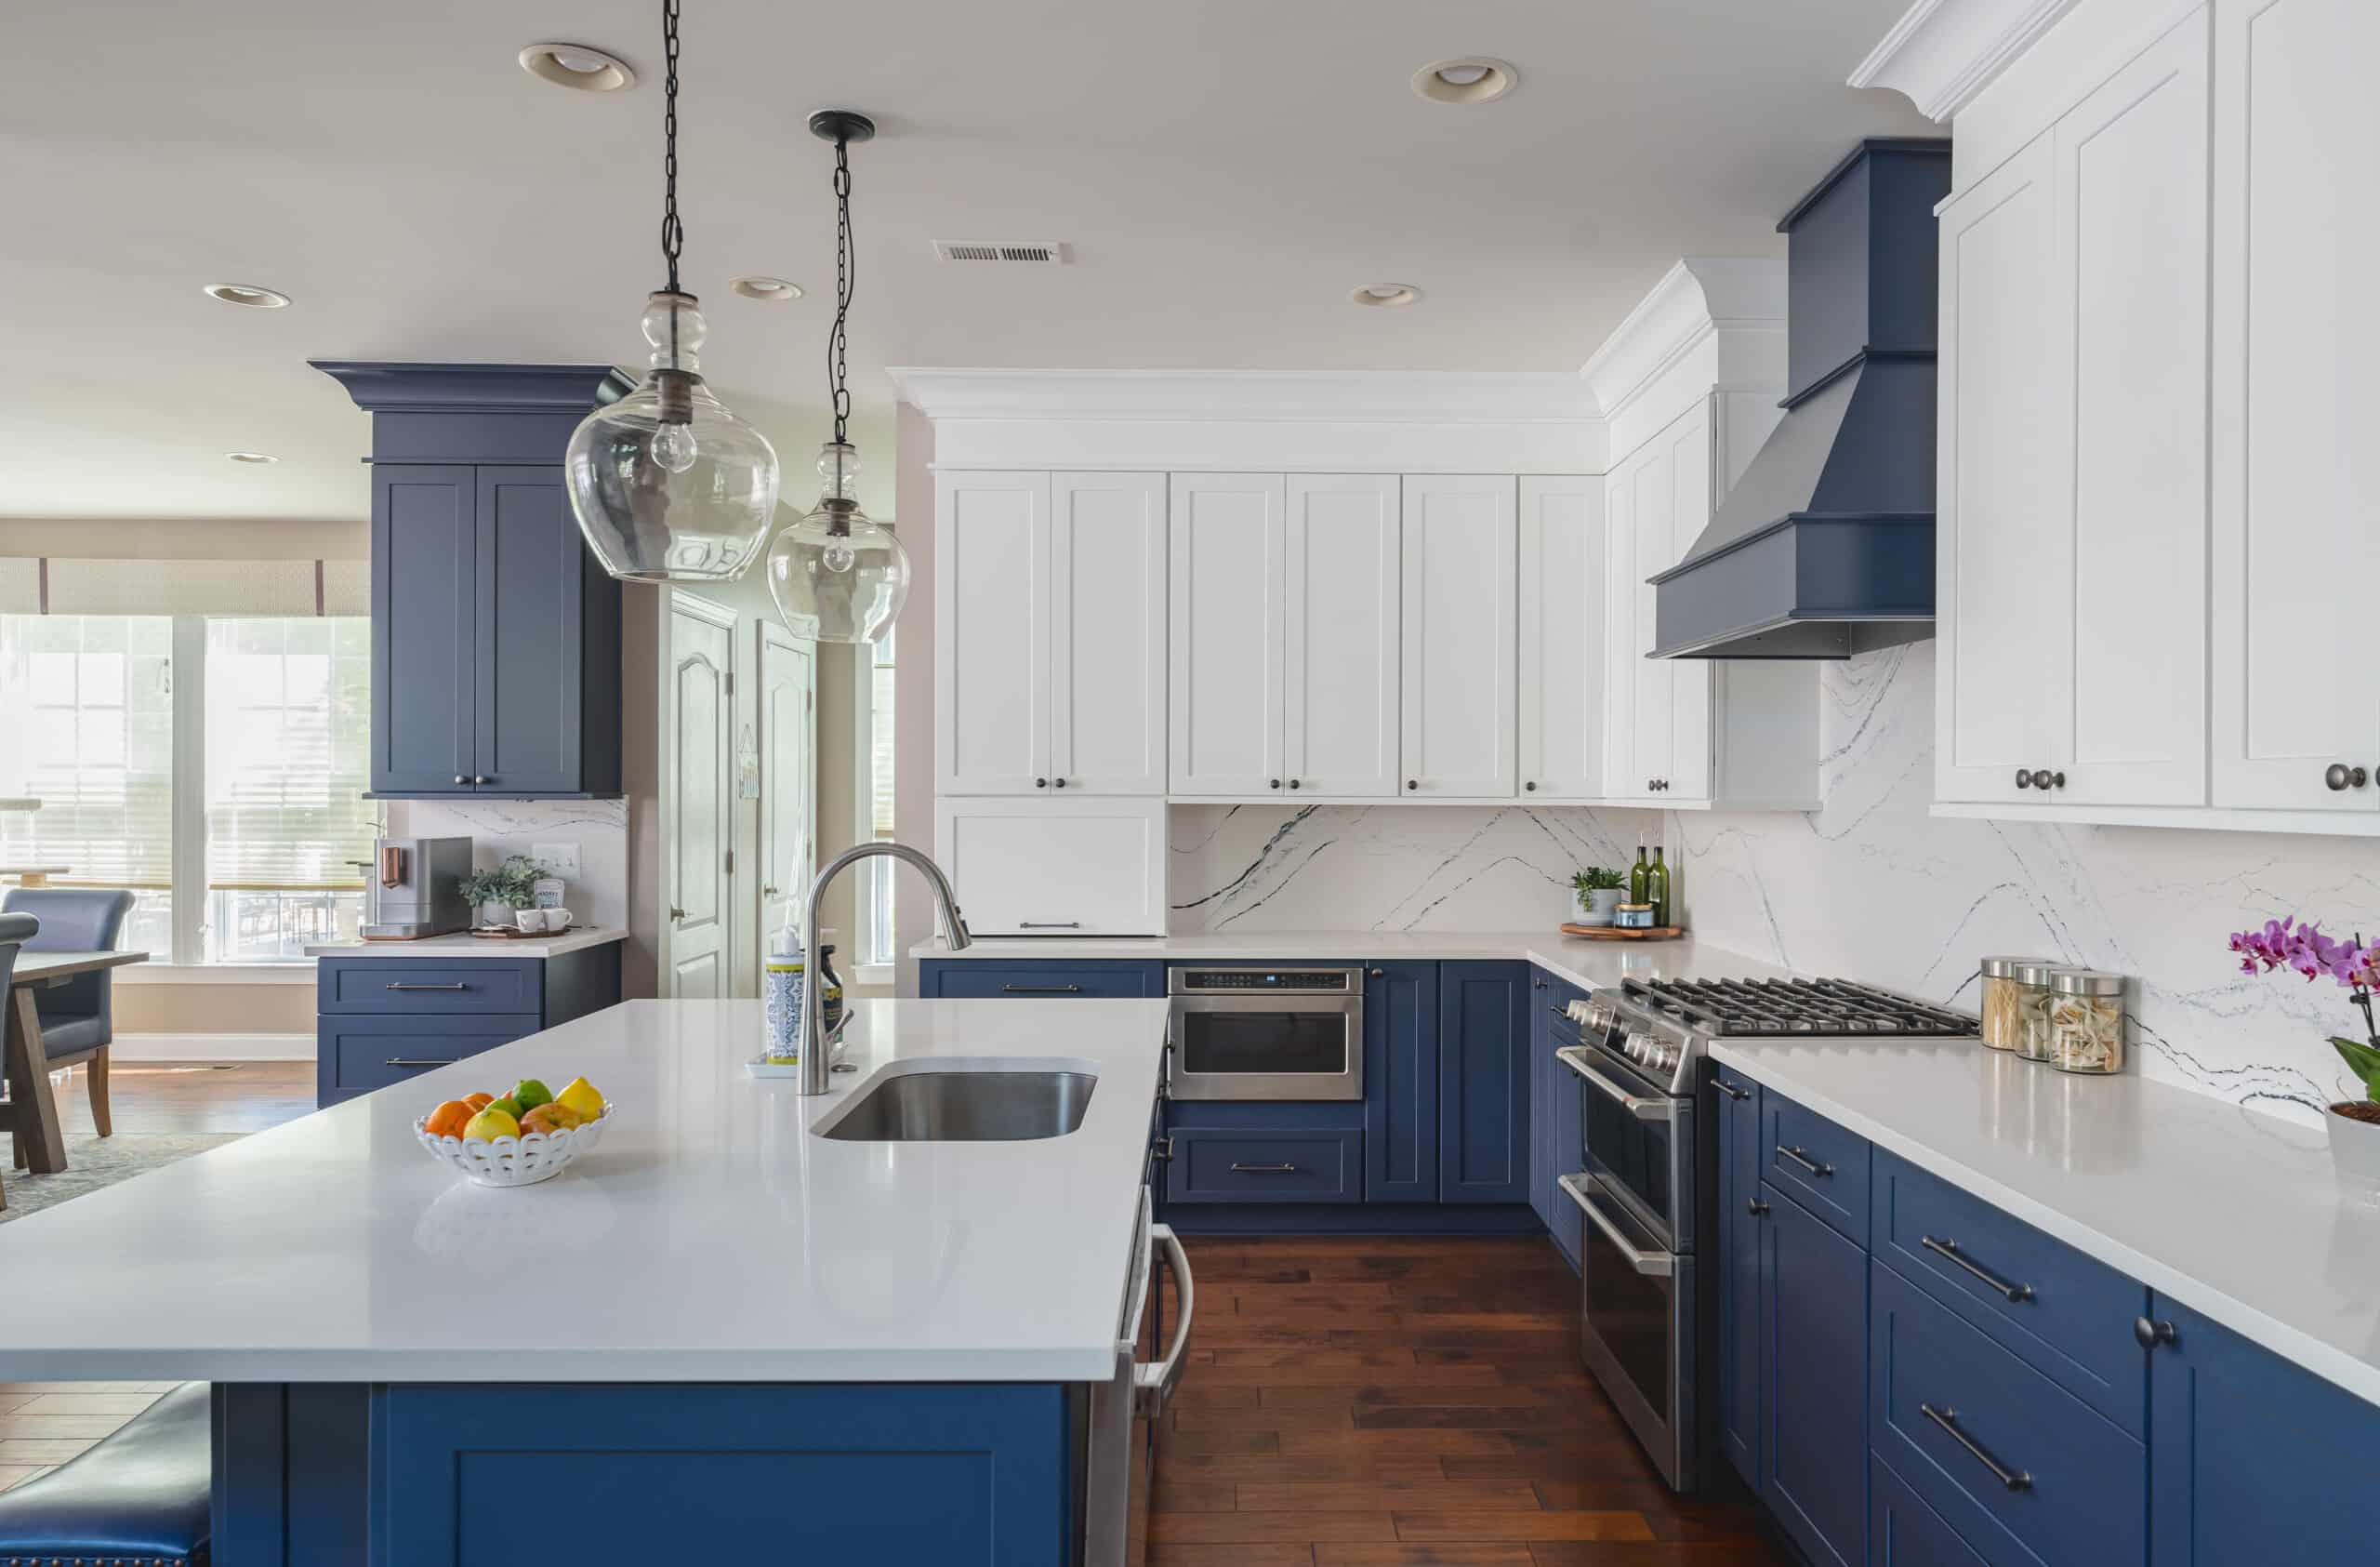 A kitchen with white and blue cabinets and white counter tops